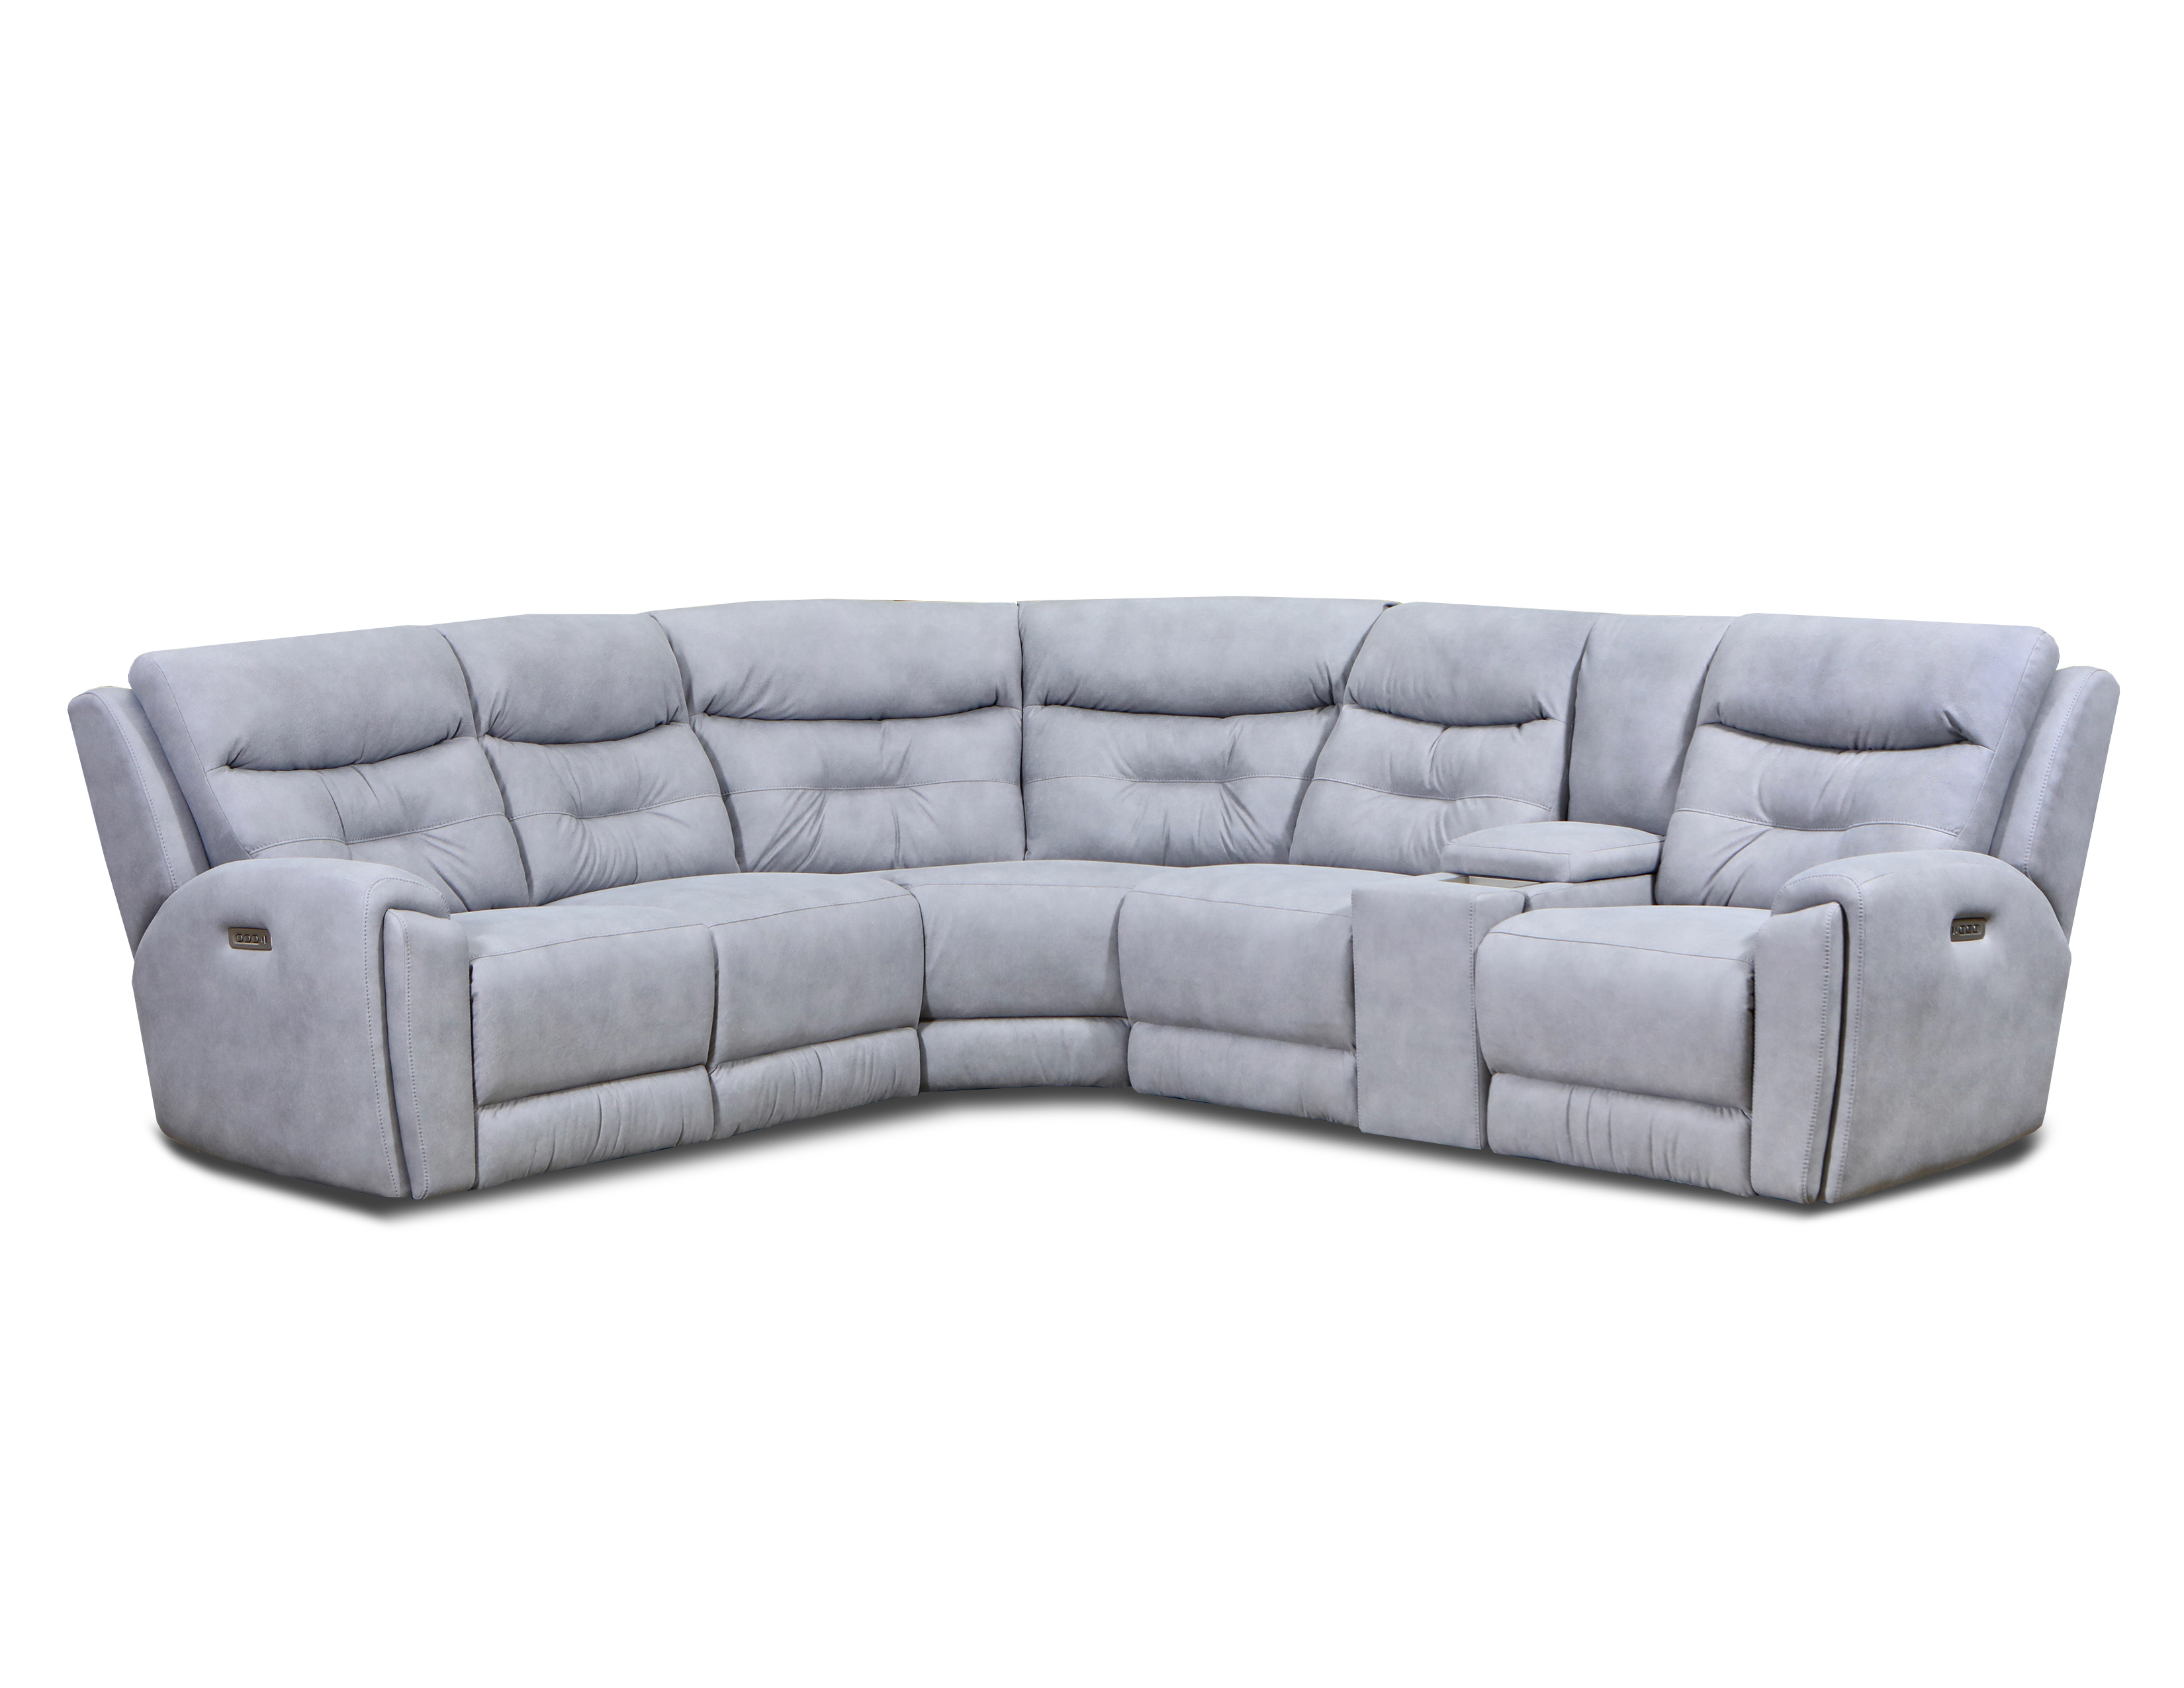 356 Point Break Sectional Image